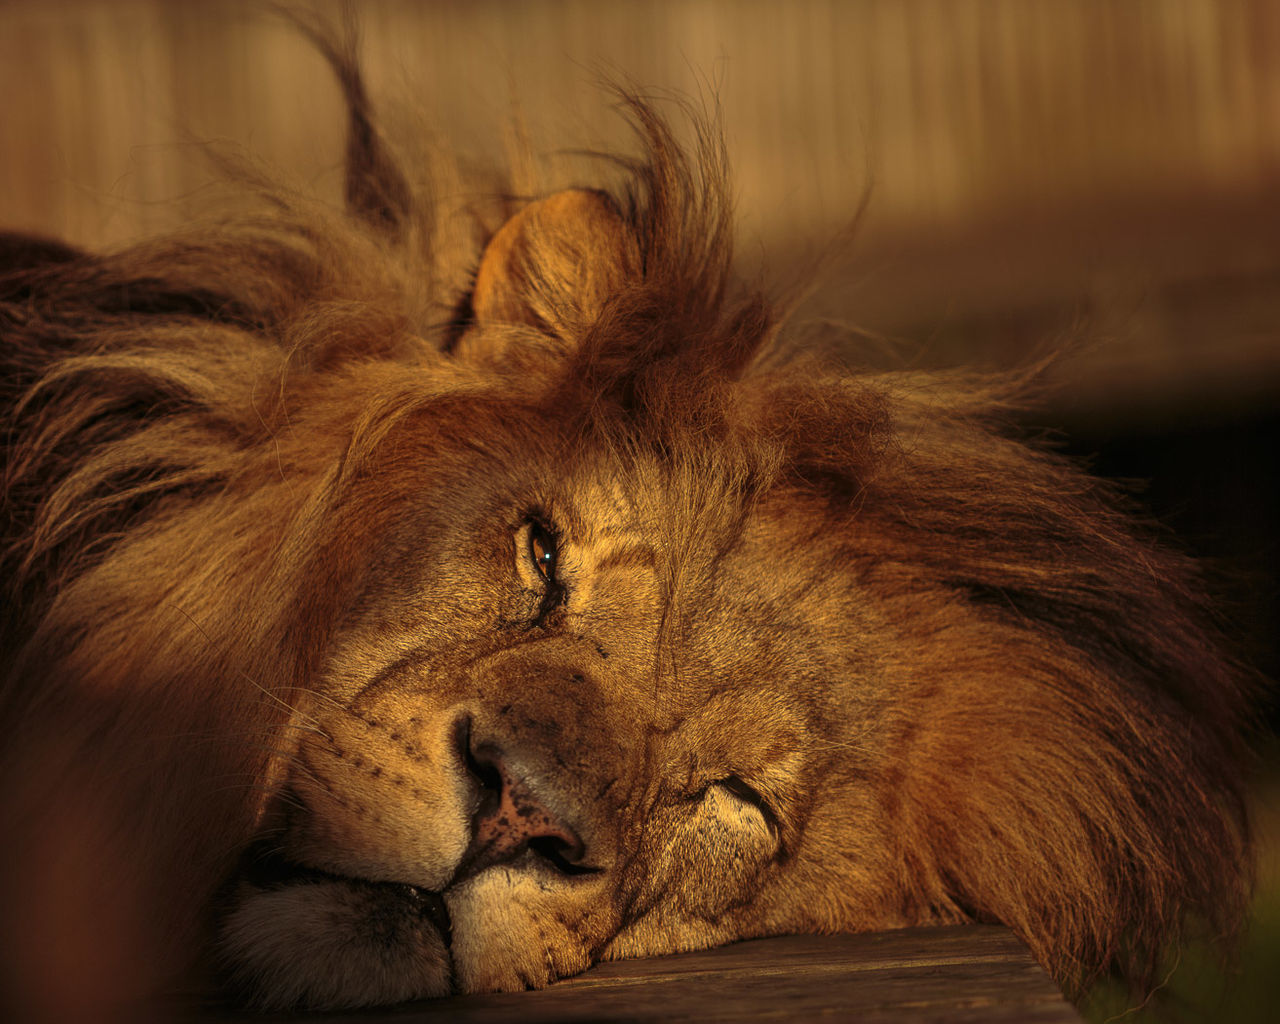 Close-up of a lion sleeping